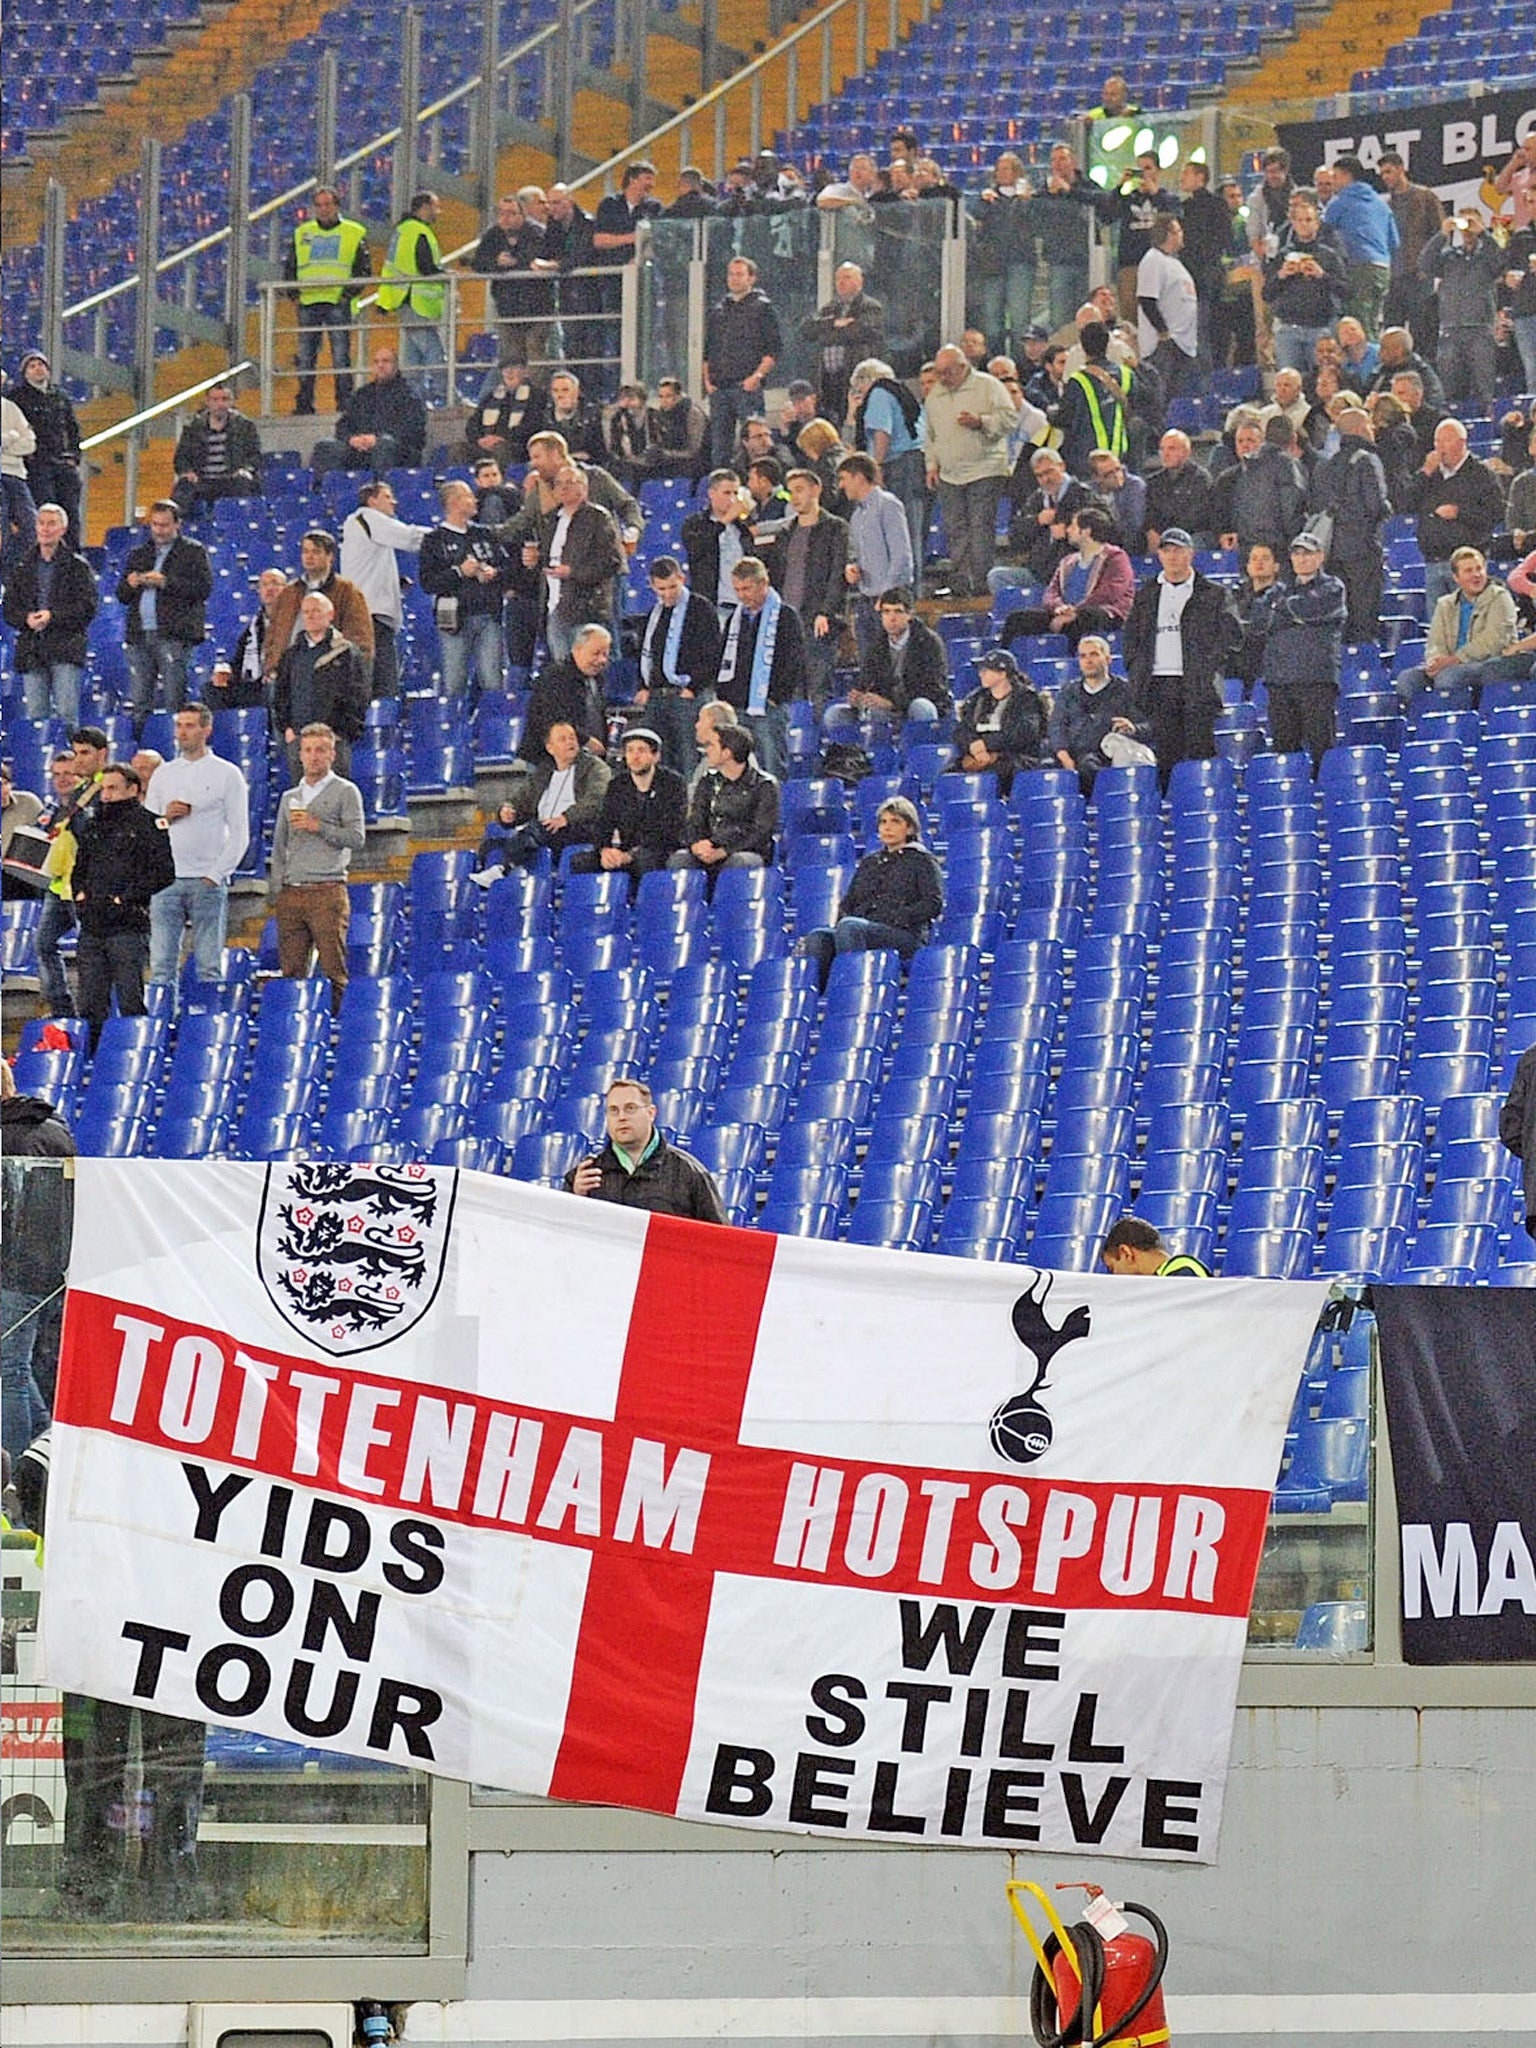 A section of Spurs fans rally behind a controversial banner